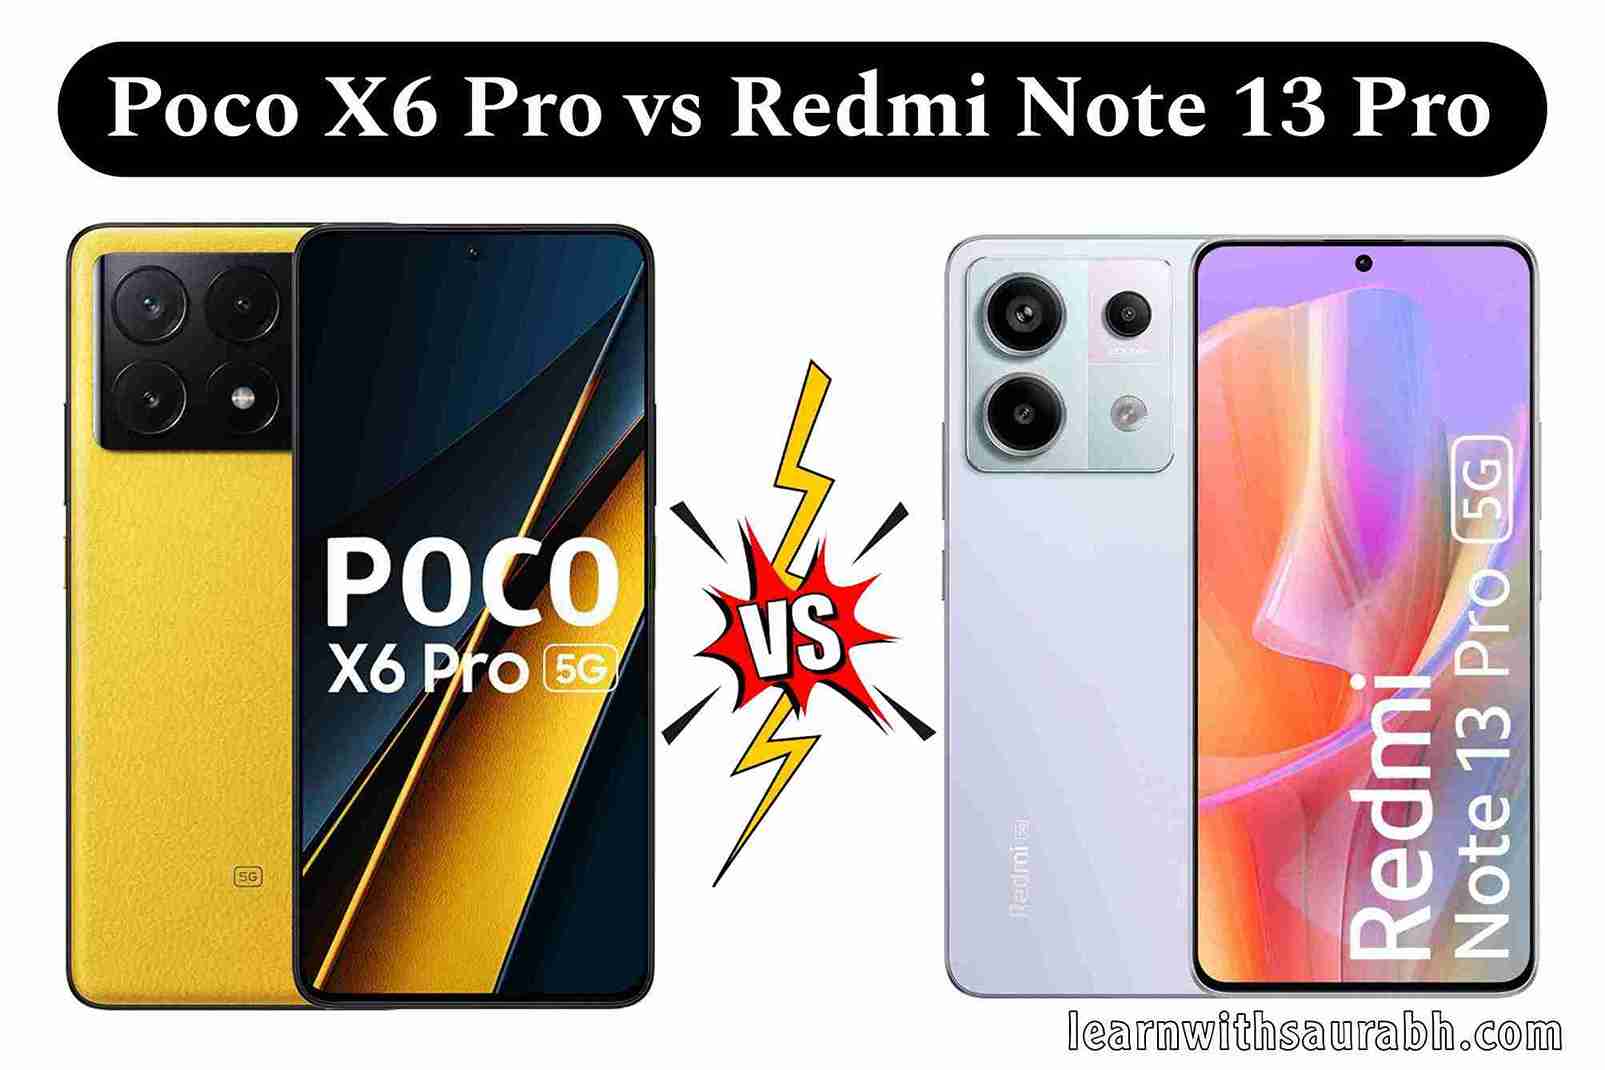 Poco X6 Pro 5G vs Redmi Note 13 Pro Comparison: Which is better between the two 5G mobiles?